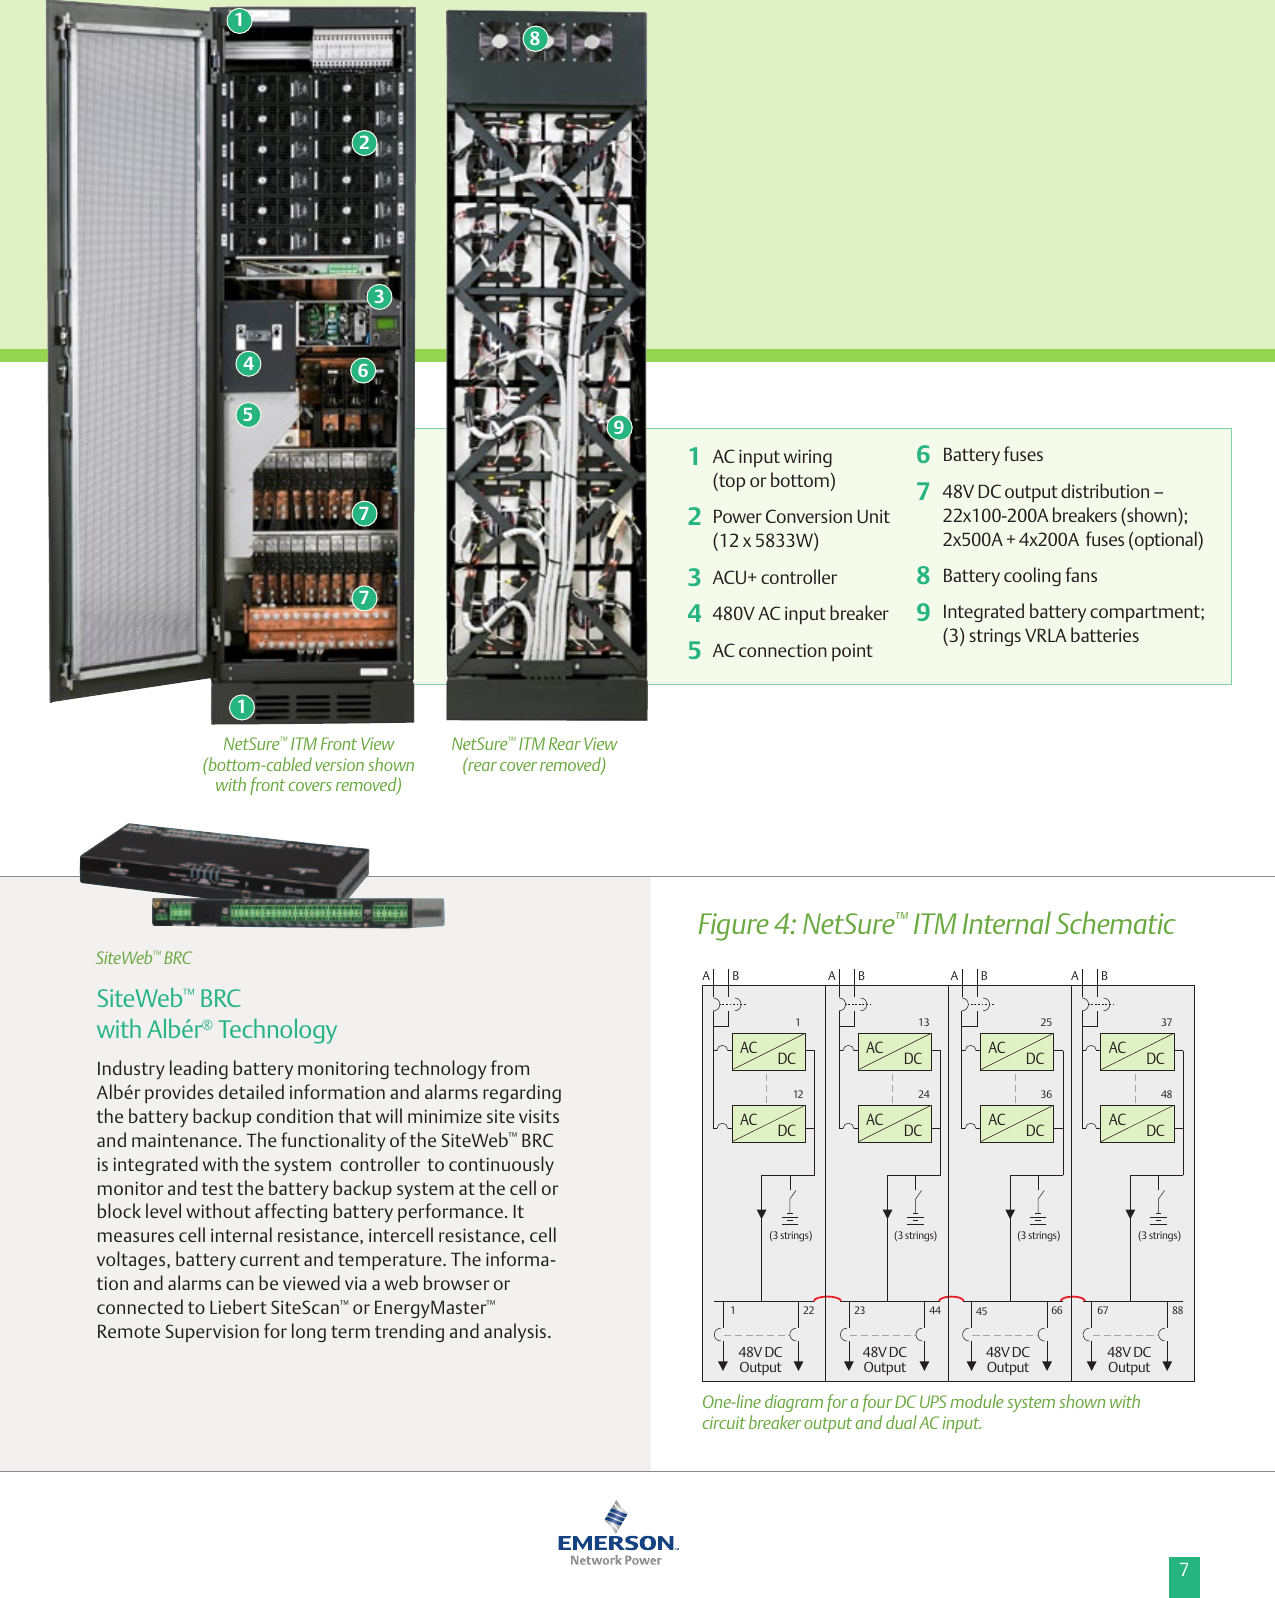 Page 7 of 12 - Emerson Emerson-Netsure-Itm-48-Vdc-Ups-70-Kw-To-280-Kw-Brochure-  Emerson-netsure-itm-48-vdc-ups-70-kw-to-280-kw-brochure